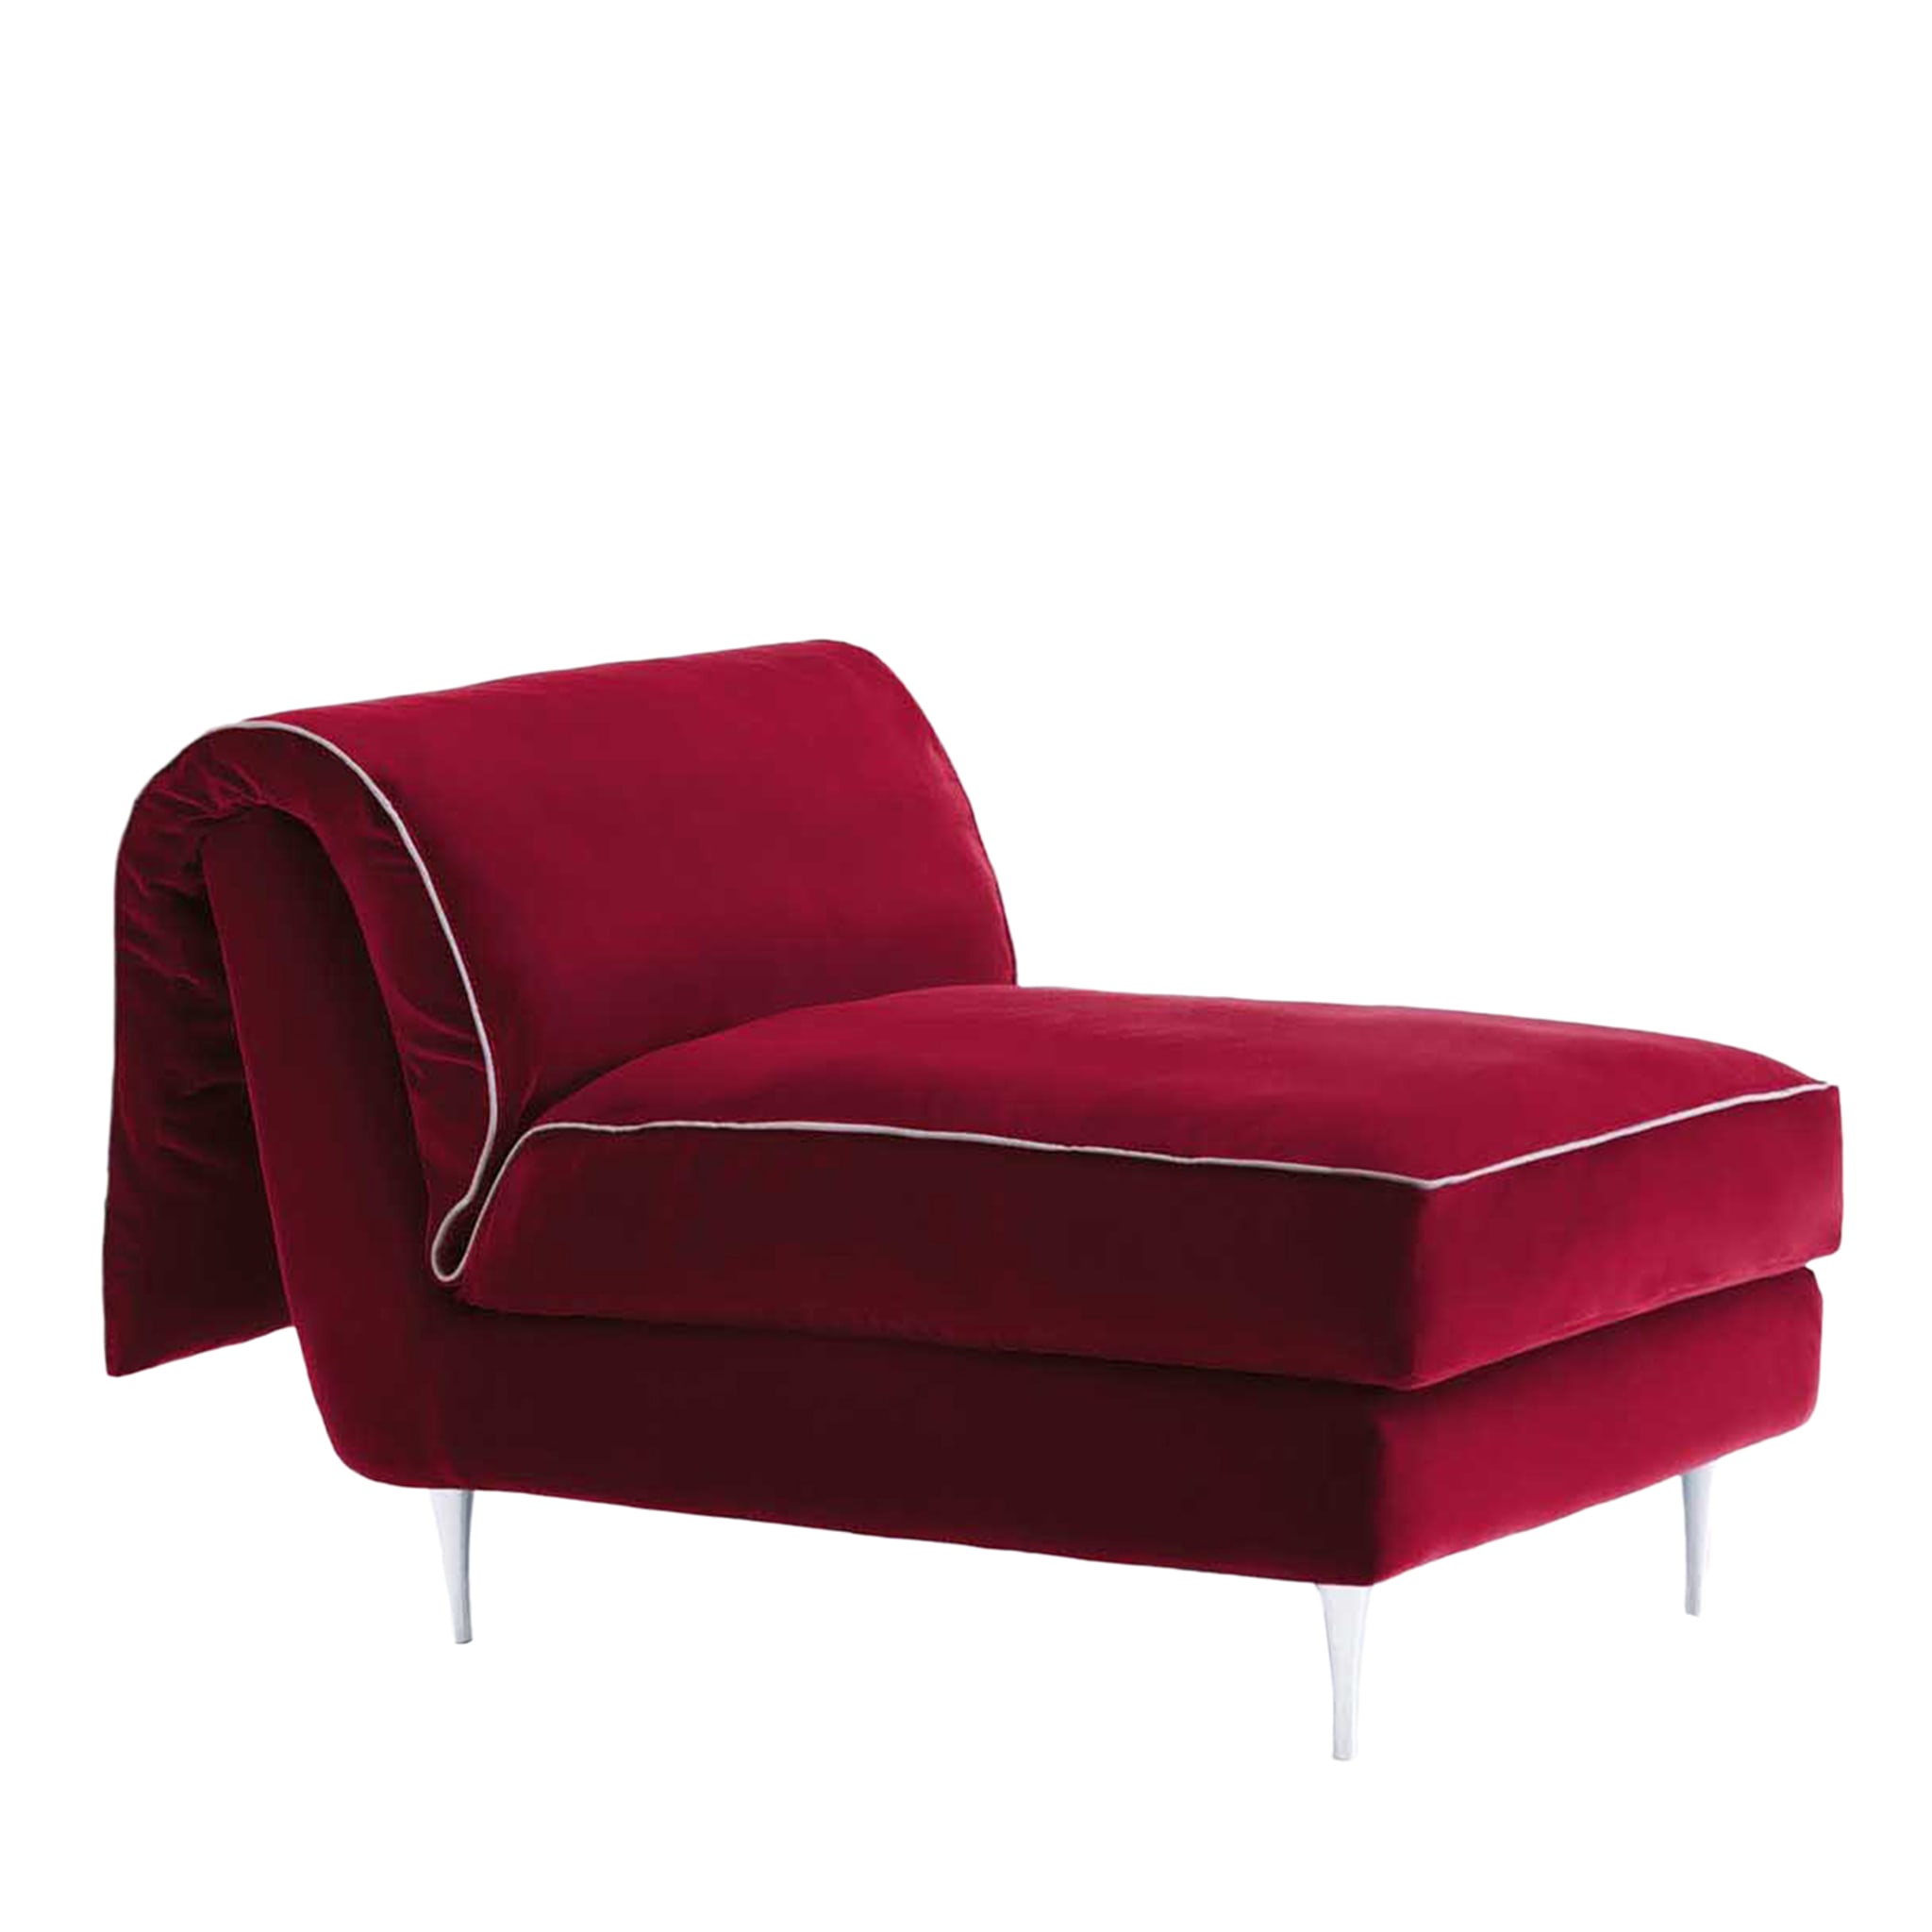 Casquet Mini in Passion Red Velvet Daybed - Main view